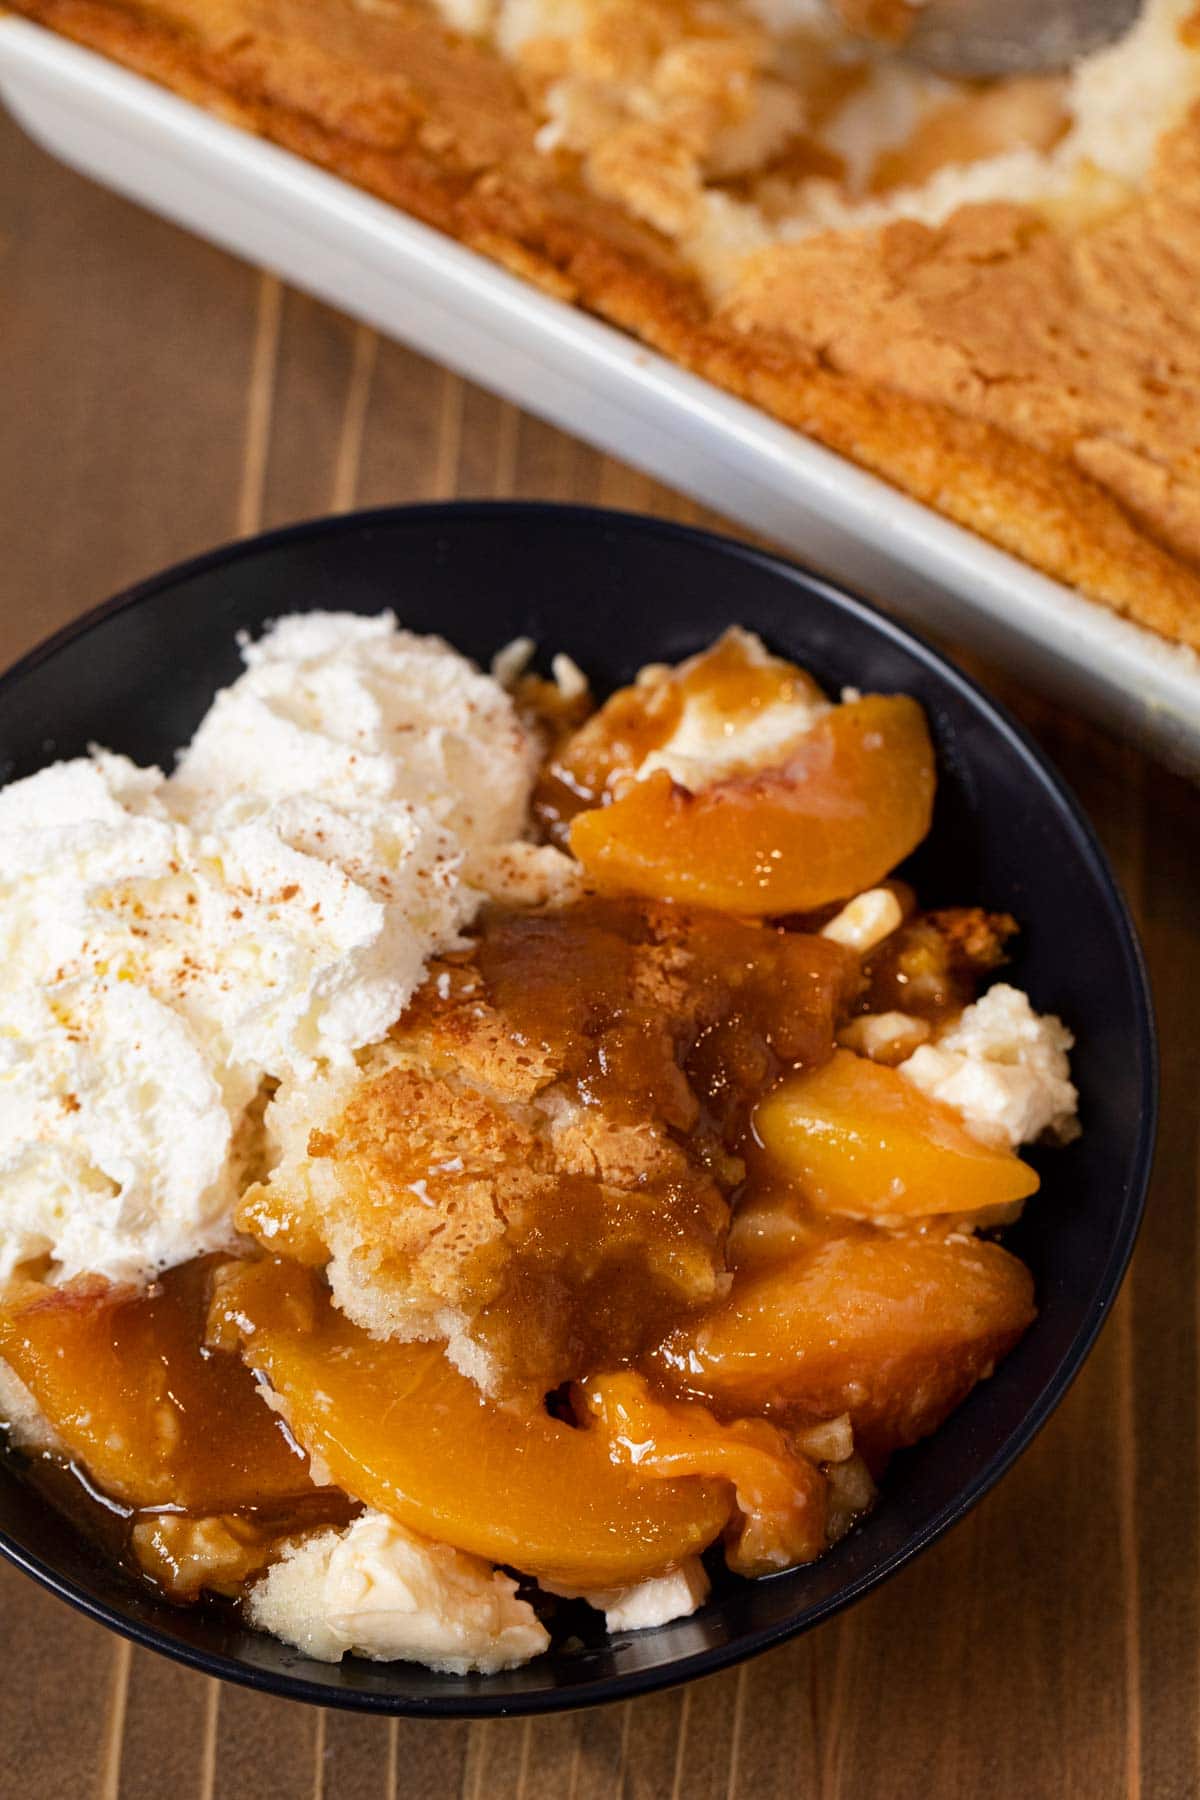 Peaches and Cream Cobbler serving in bowl with whipped cream